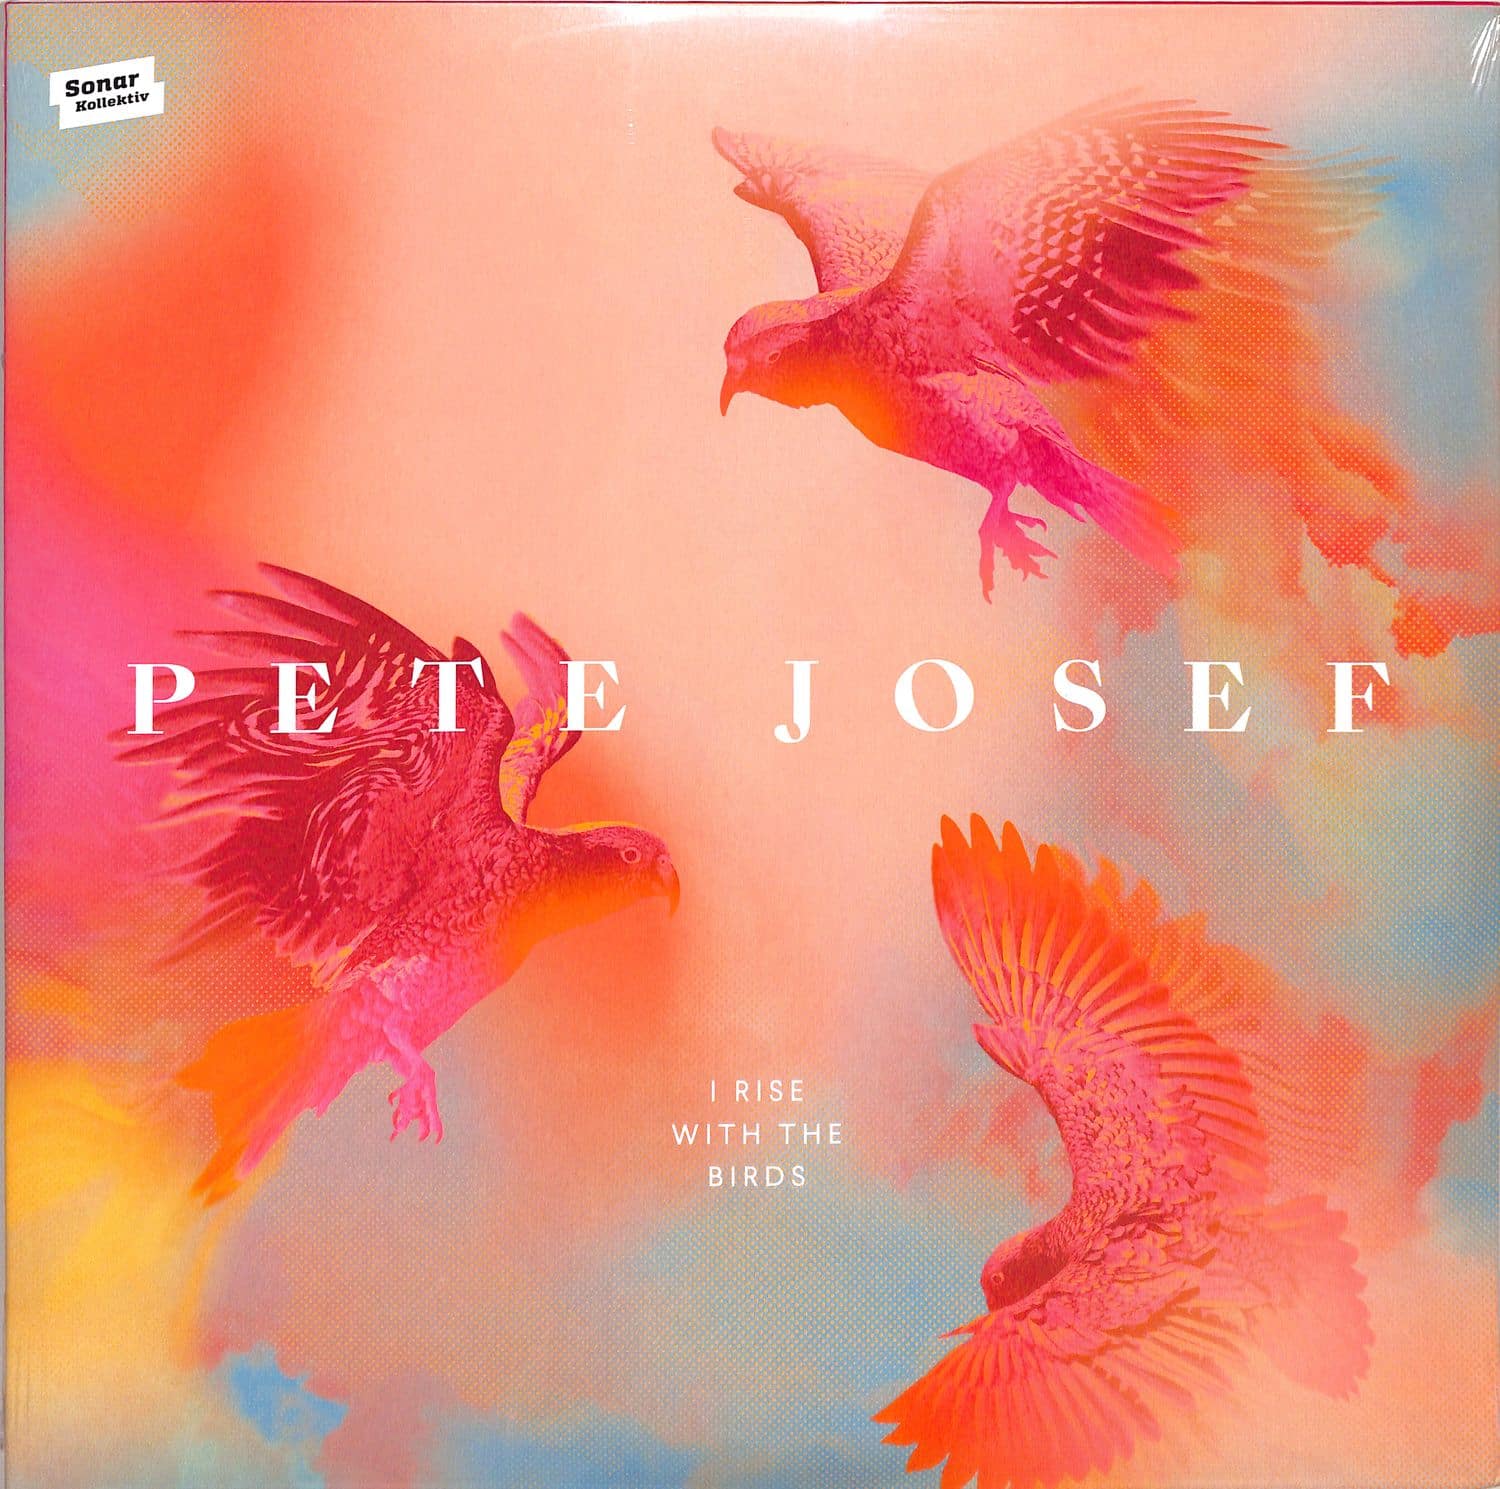 Pete Josef - I RISE WITH THE BIRDS 